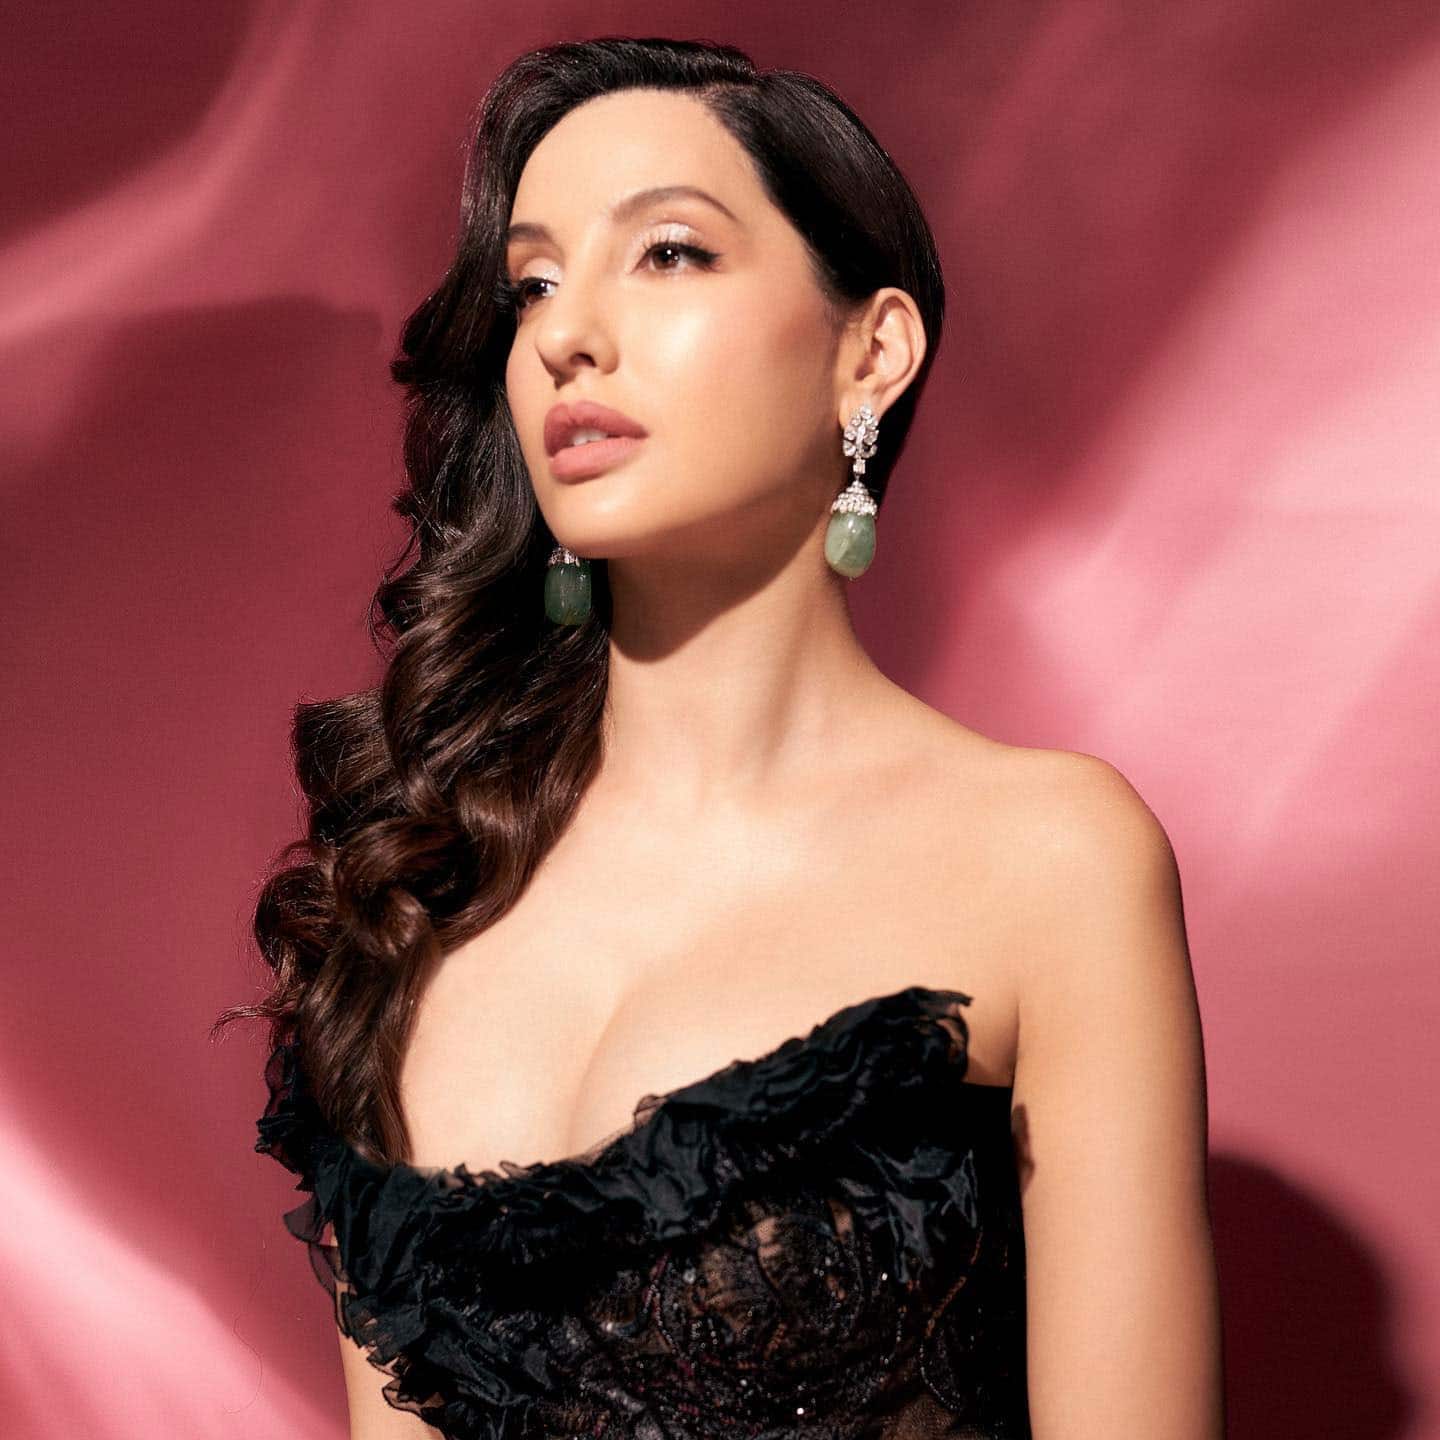 Nora Fatehi poses in a sexy photoshoot